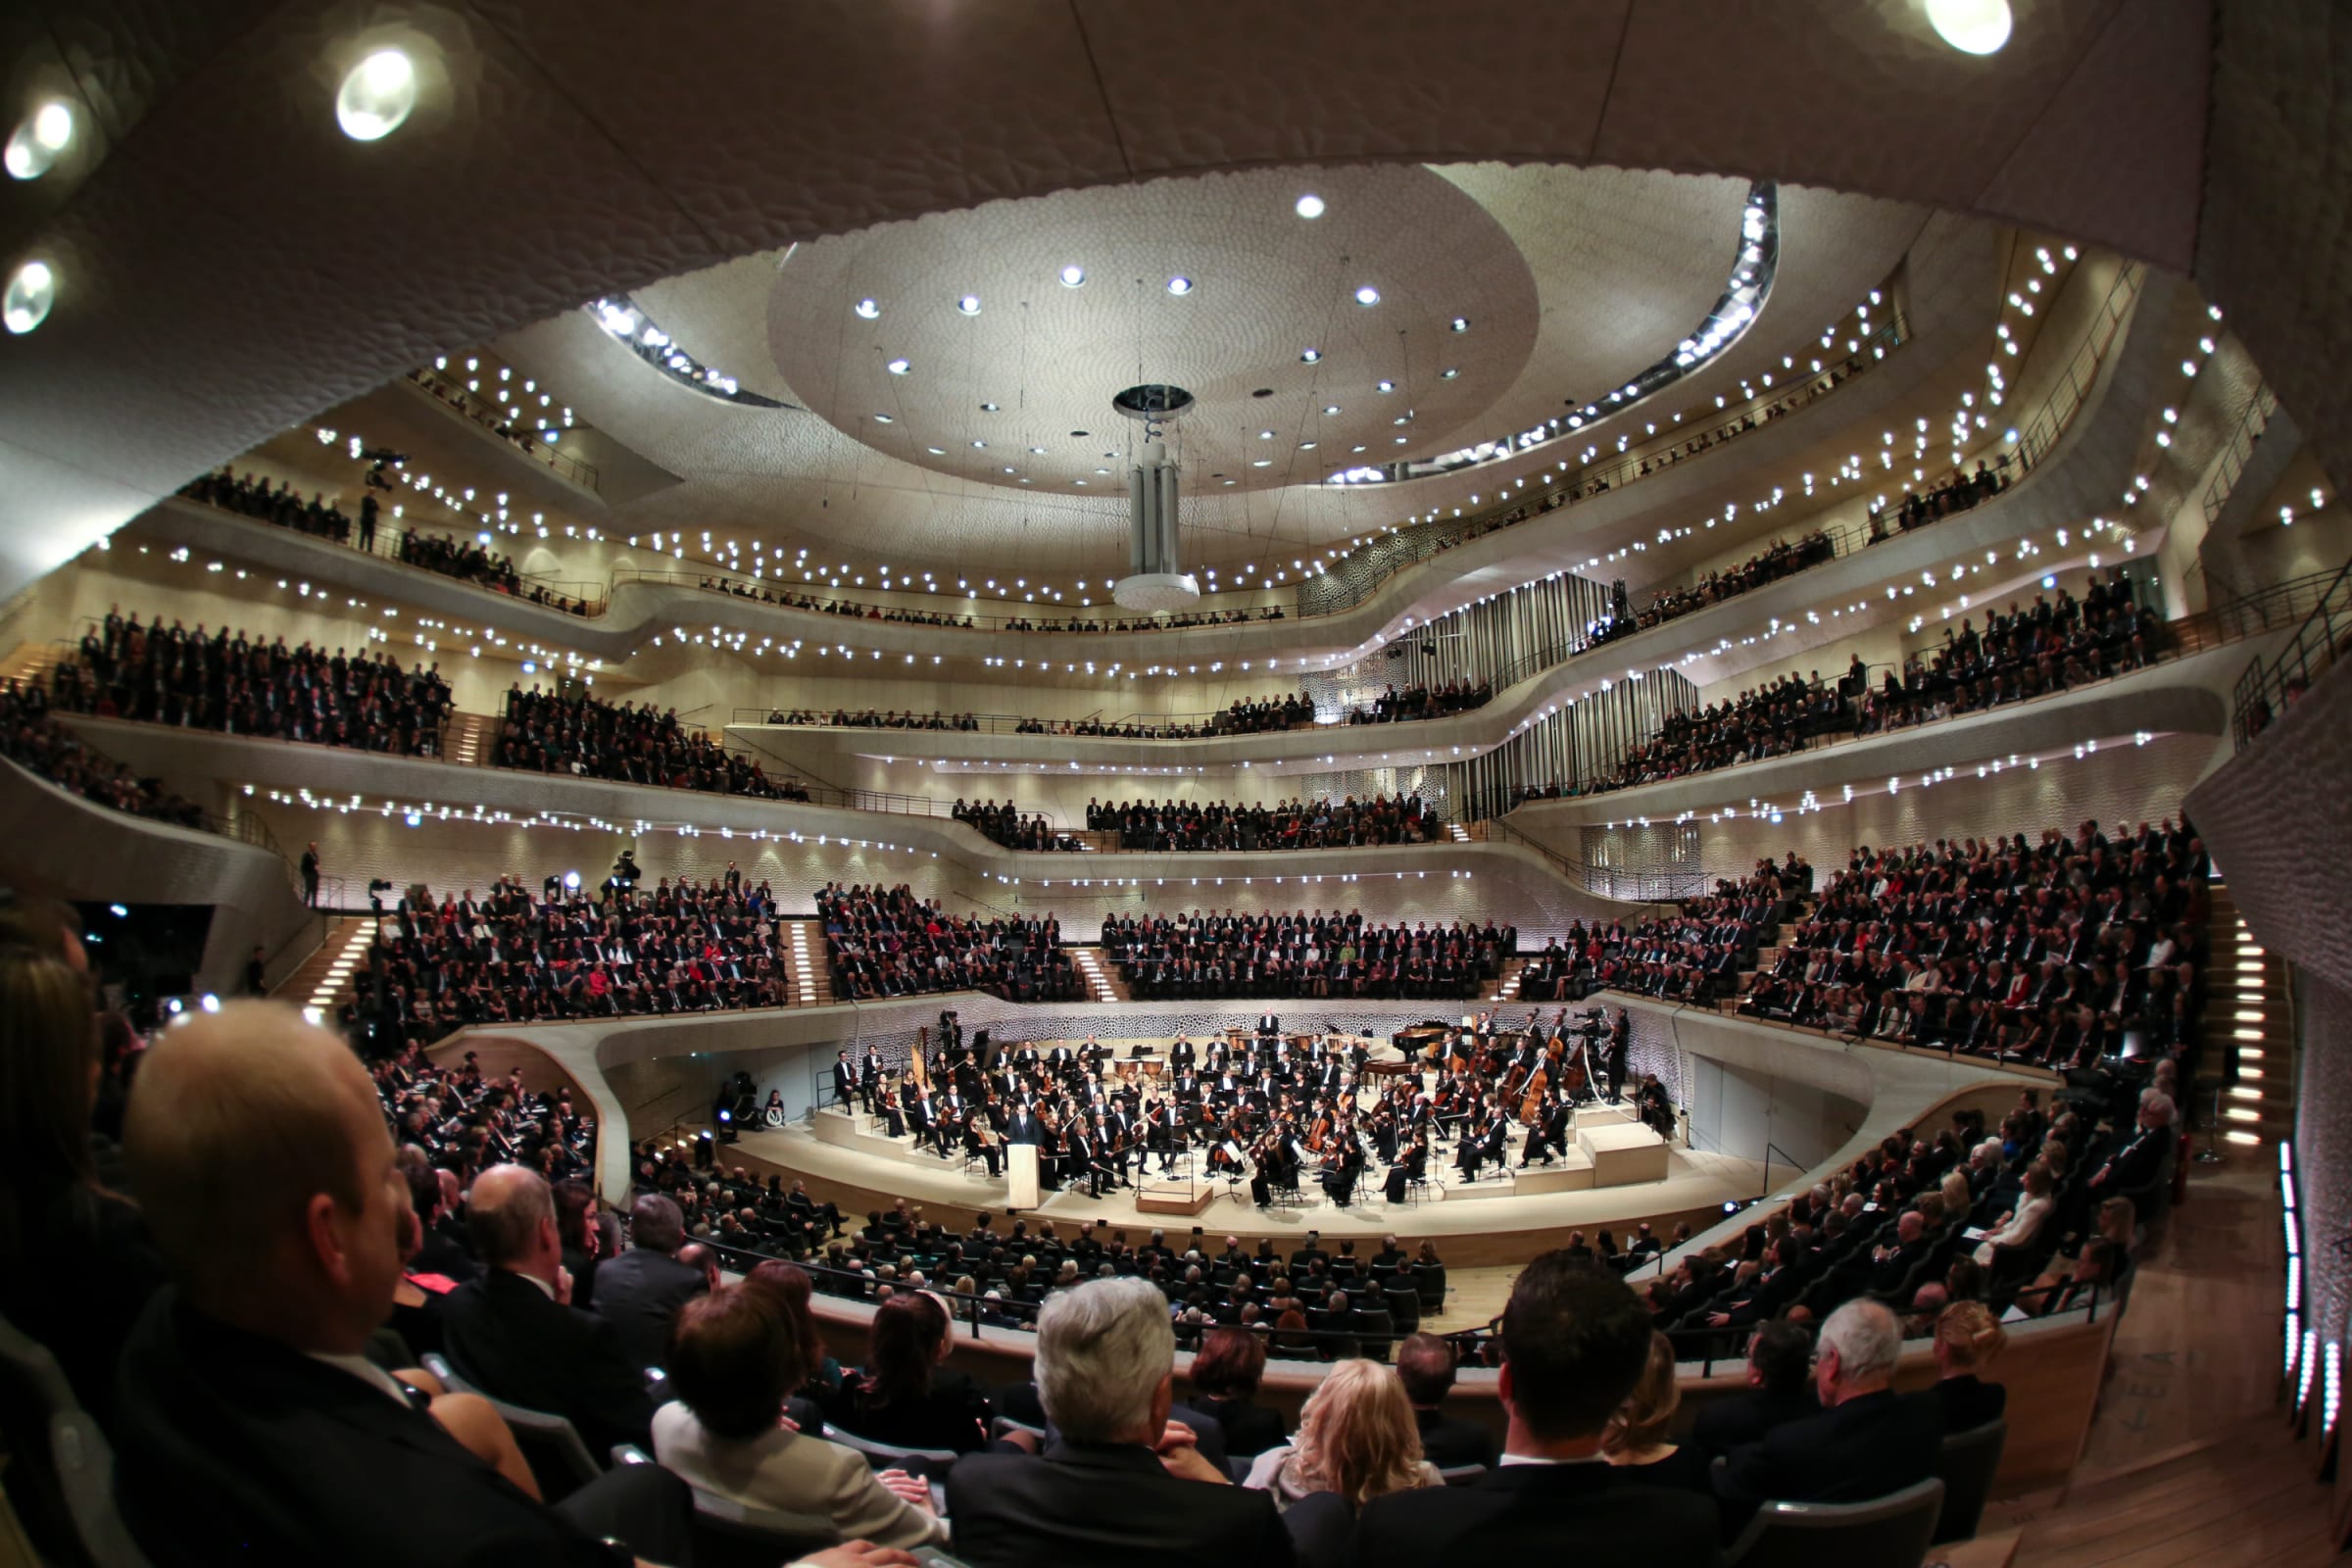 People attend the opening ceremony and concert of the Elbphilharmonie.